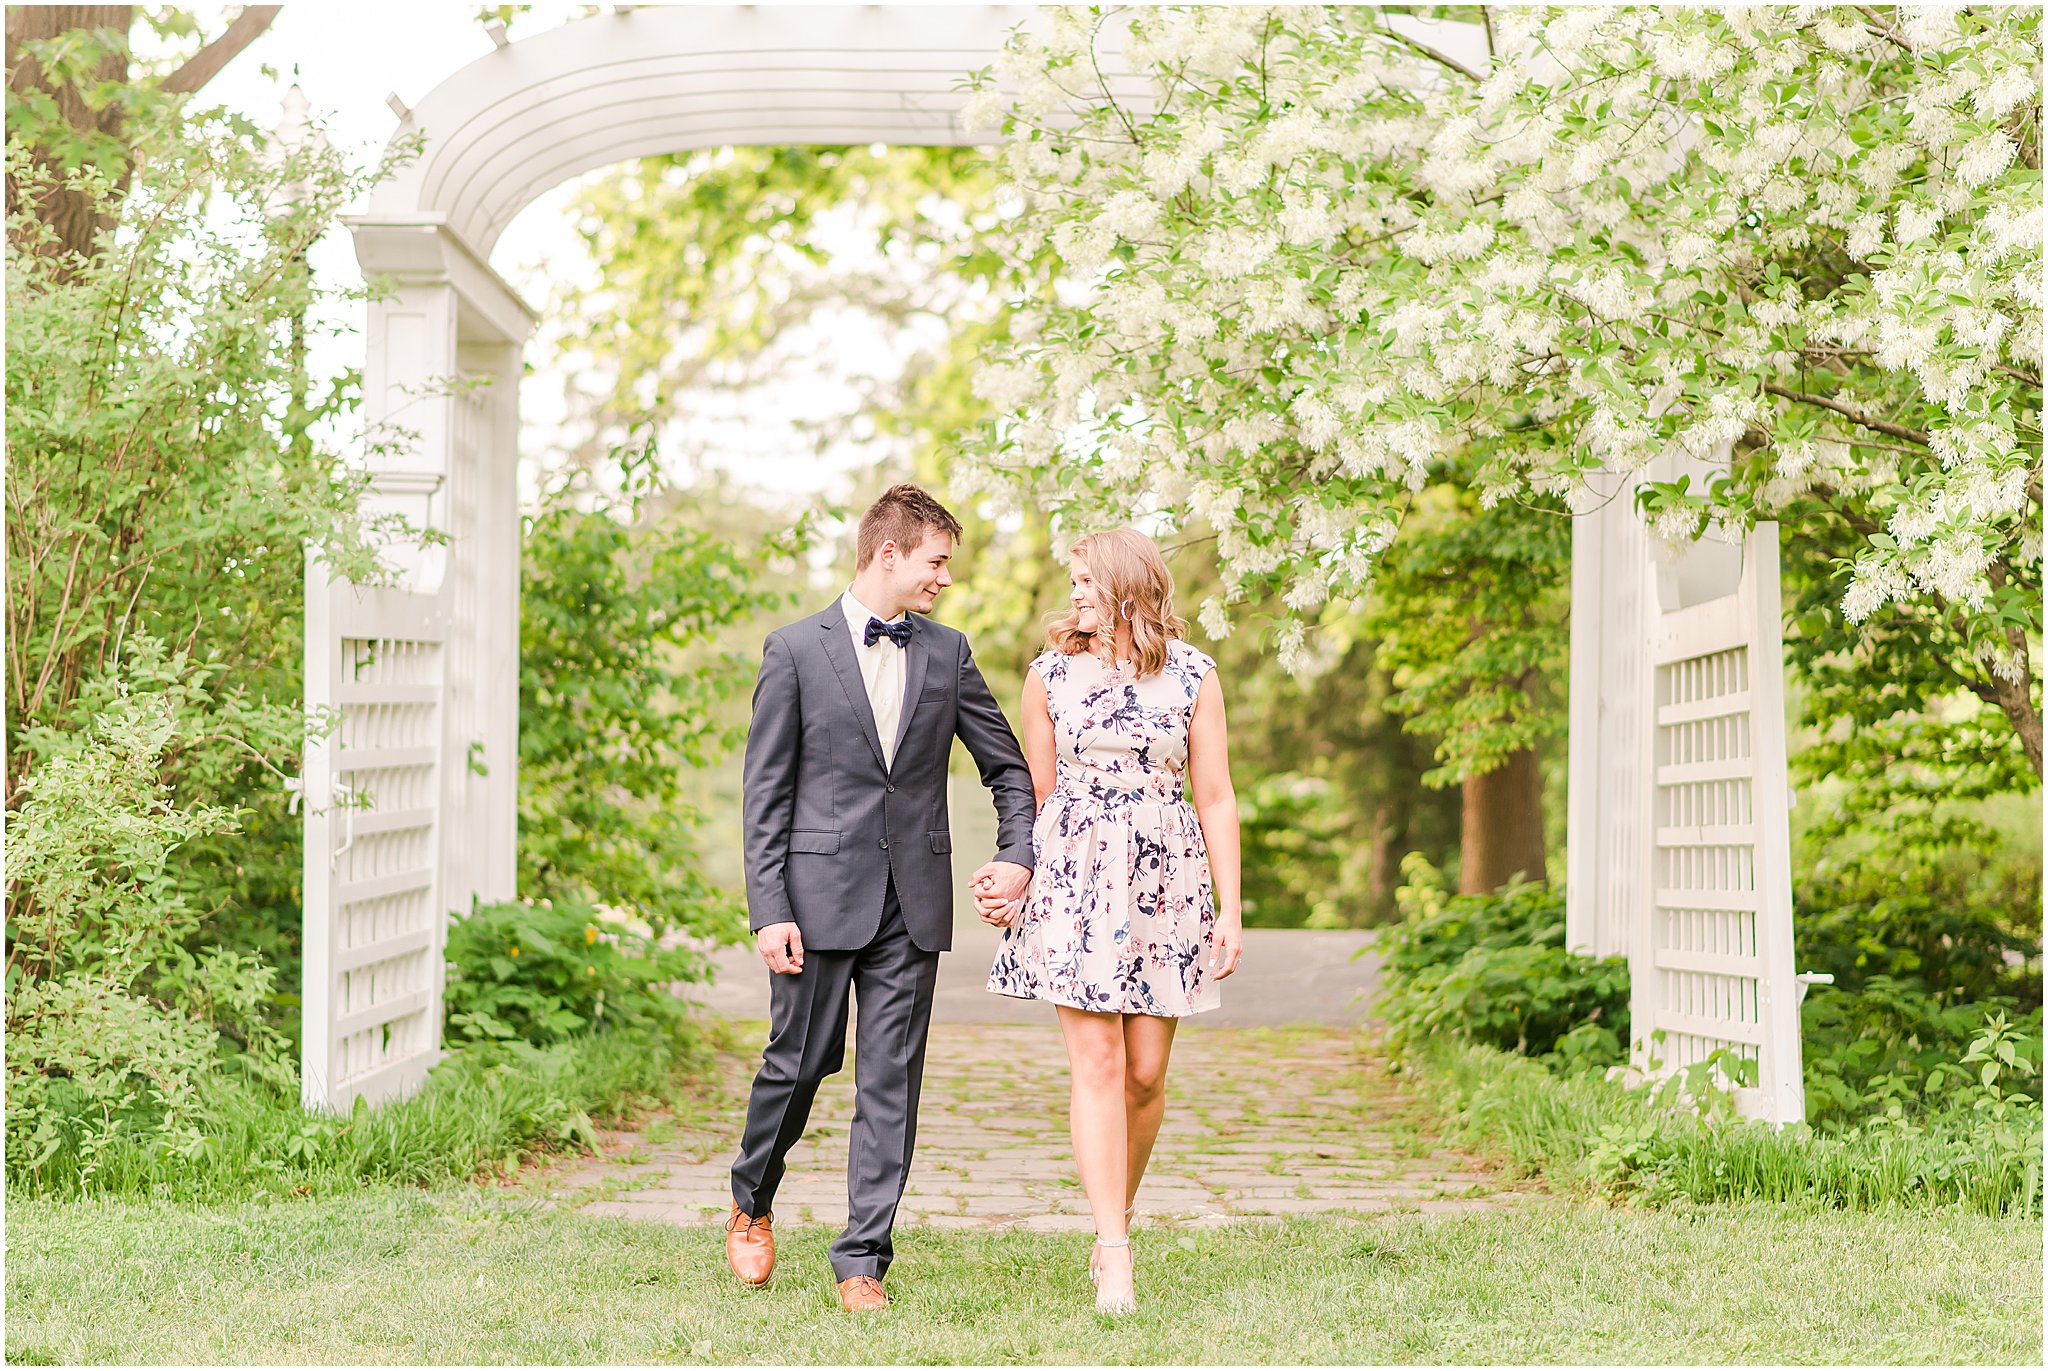 Boy and girl holding handing and walking under an arch at Newfields engagement session sporting fun spring fashion trends